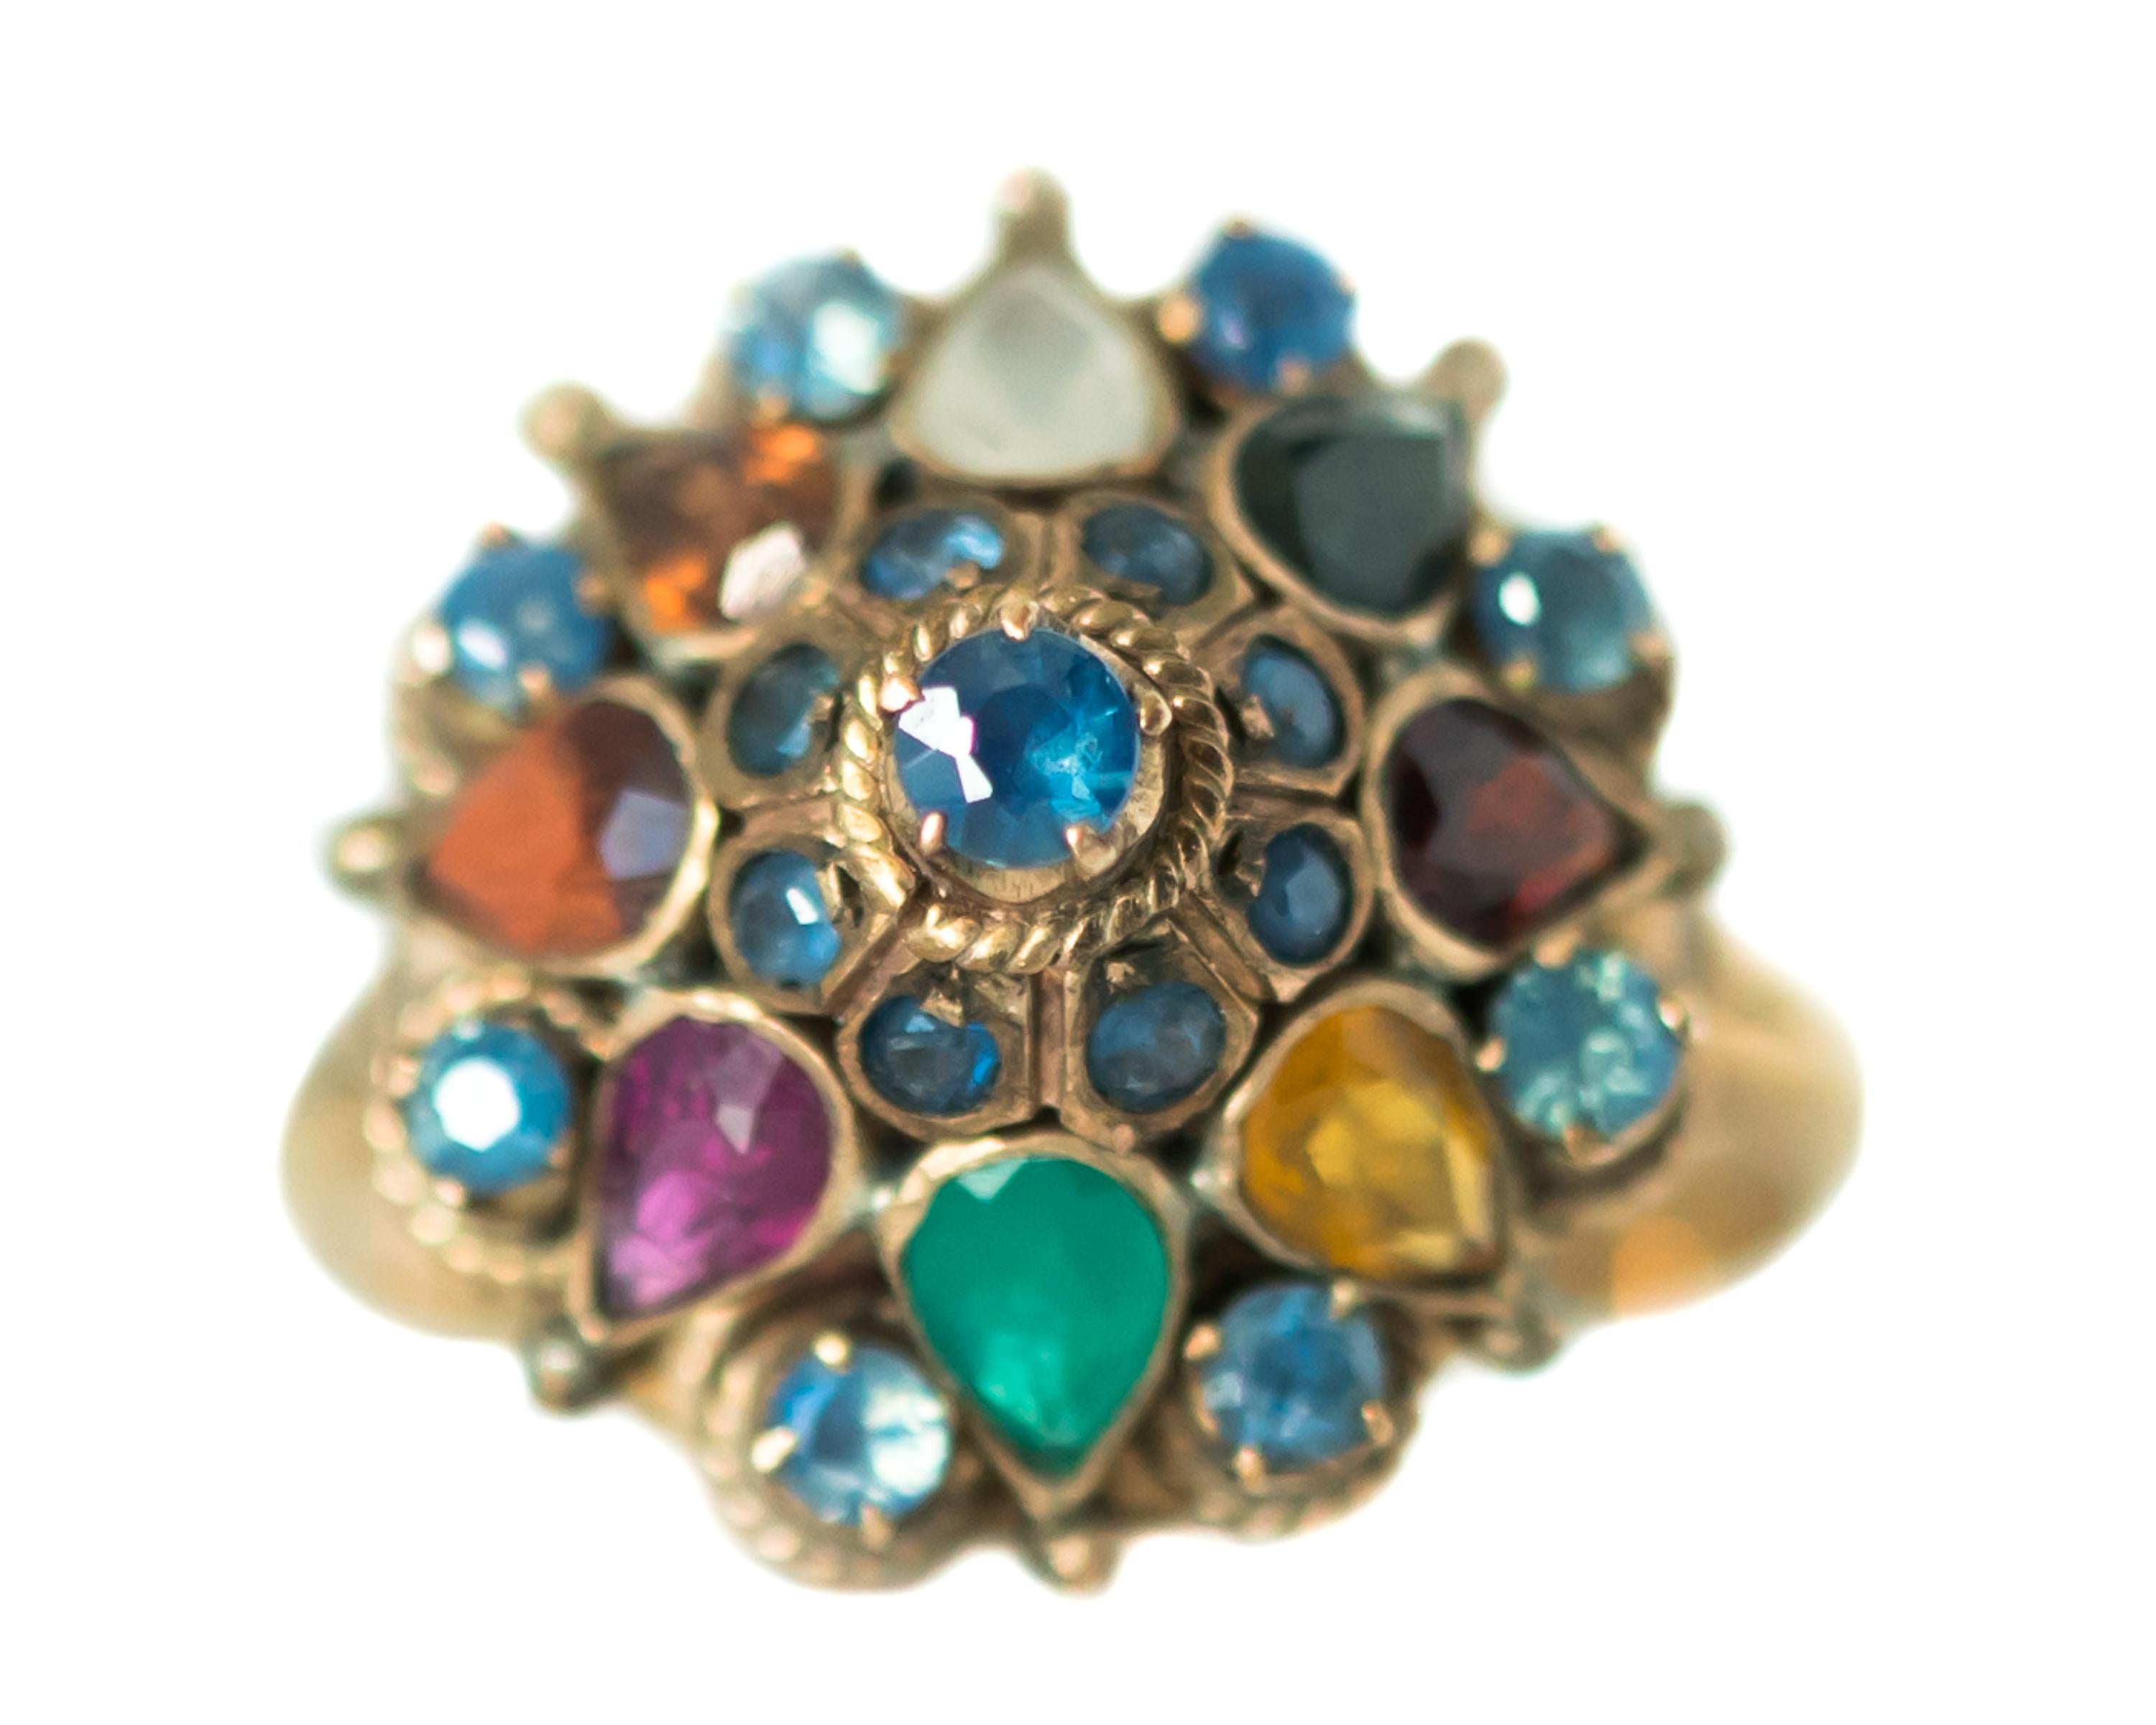 1940s Retro Gemstone Dome Ring - 14 Karat Yellow Gold, Emeralds, Sapphires, Citrine

Features: 
Dome Style
14 Karat Yellow Gold Setting with a Rosy Patina
Round Prong Set Sapphires
Pear Shaped Bezel Set Emerald, Citrine 
Cathedral Setting
Swirl